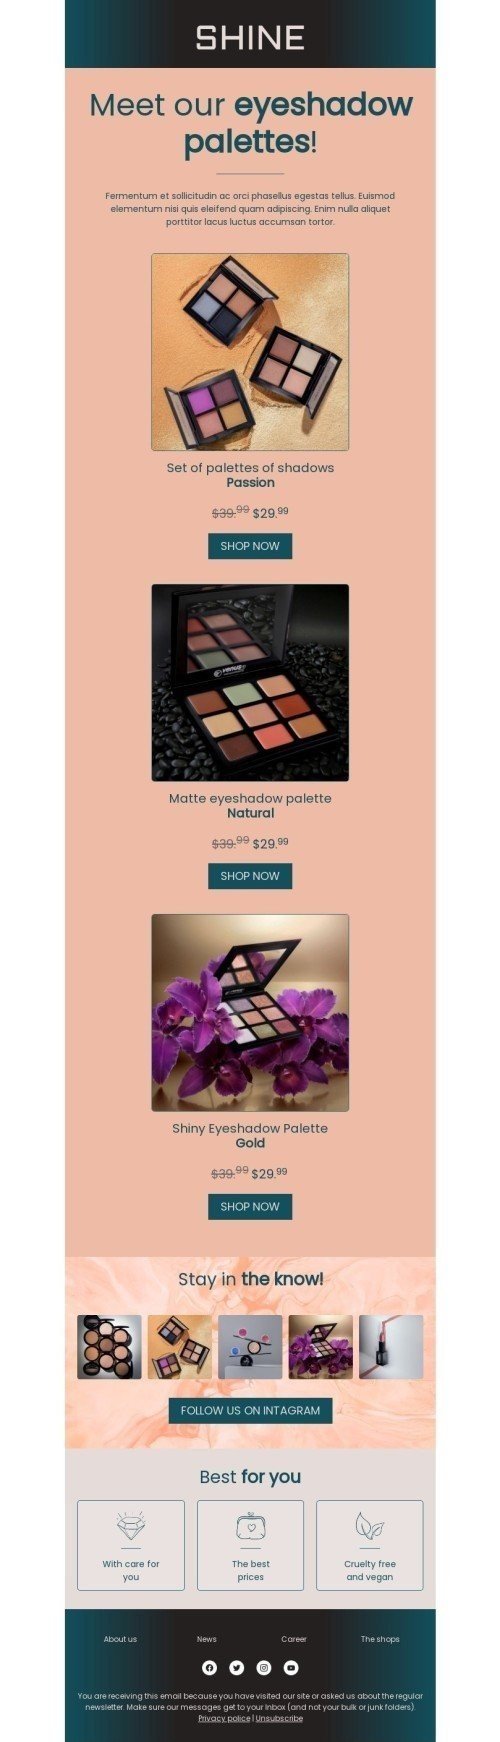 Product Launch Announcement Email Template "Meet eyeshadow palettes" for Beauty & Personal Care industry mobile view